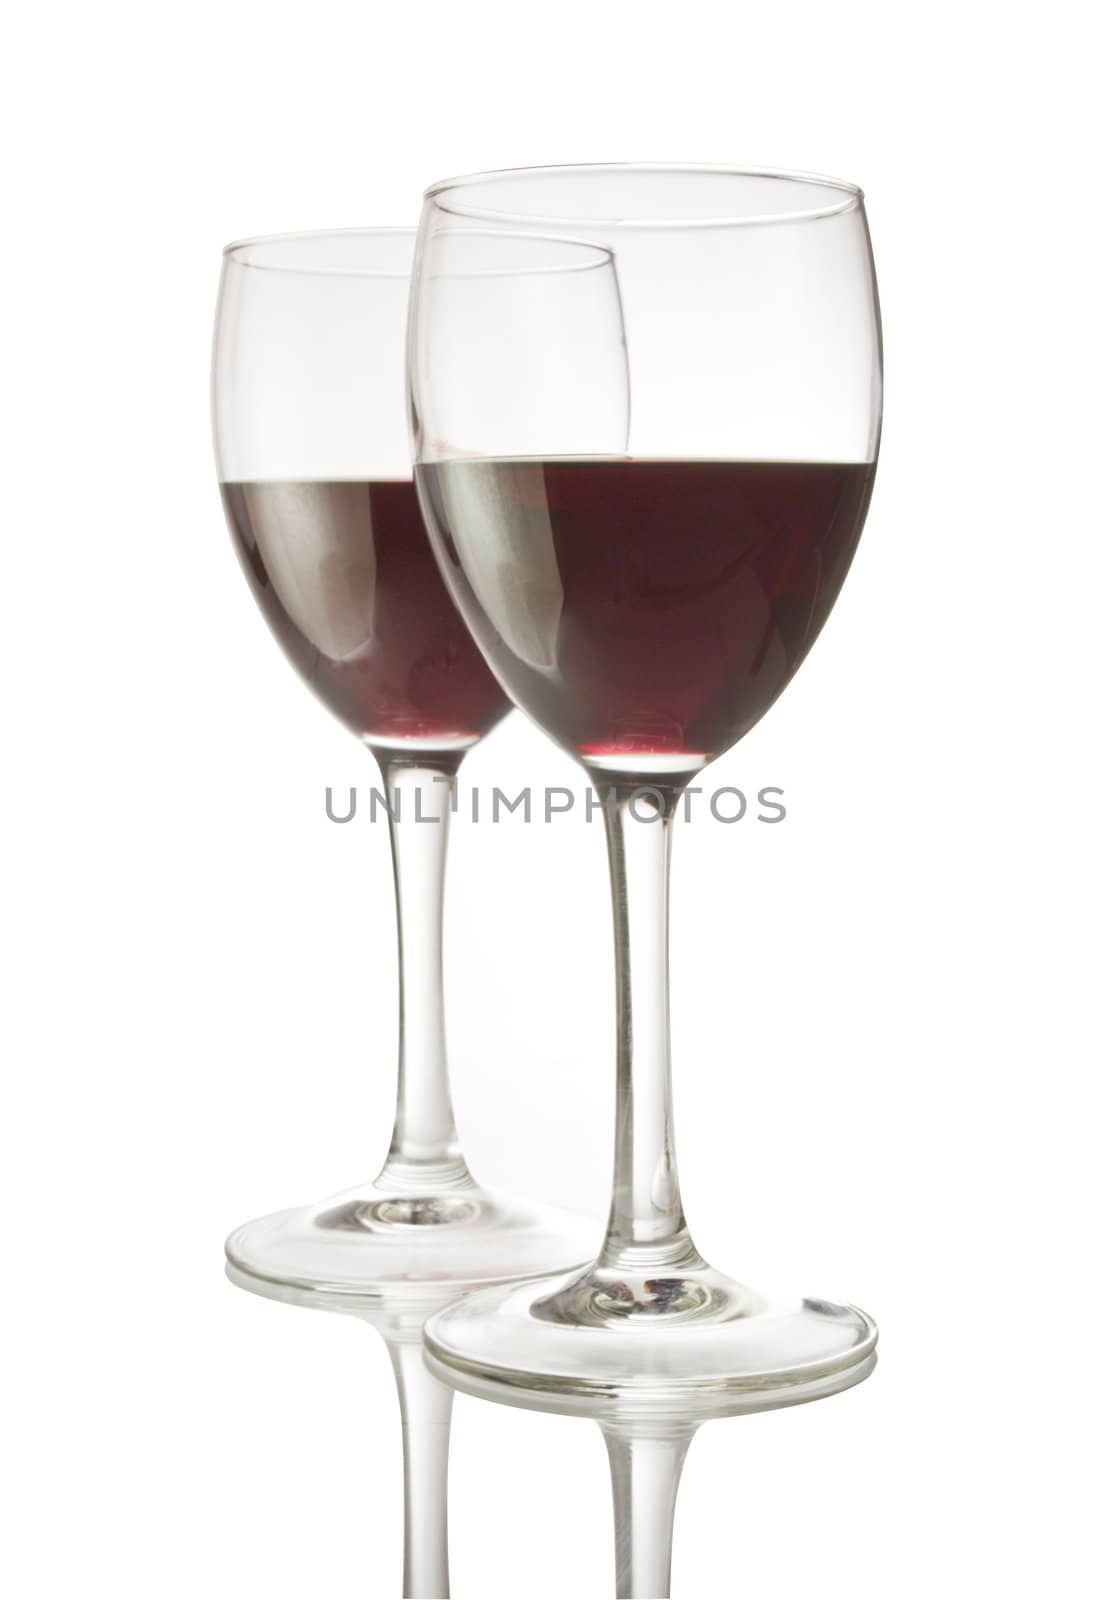 Two wineglasses filled with red wine, isolated on white with clipping path.